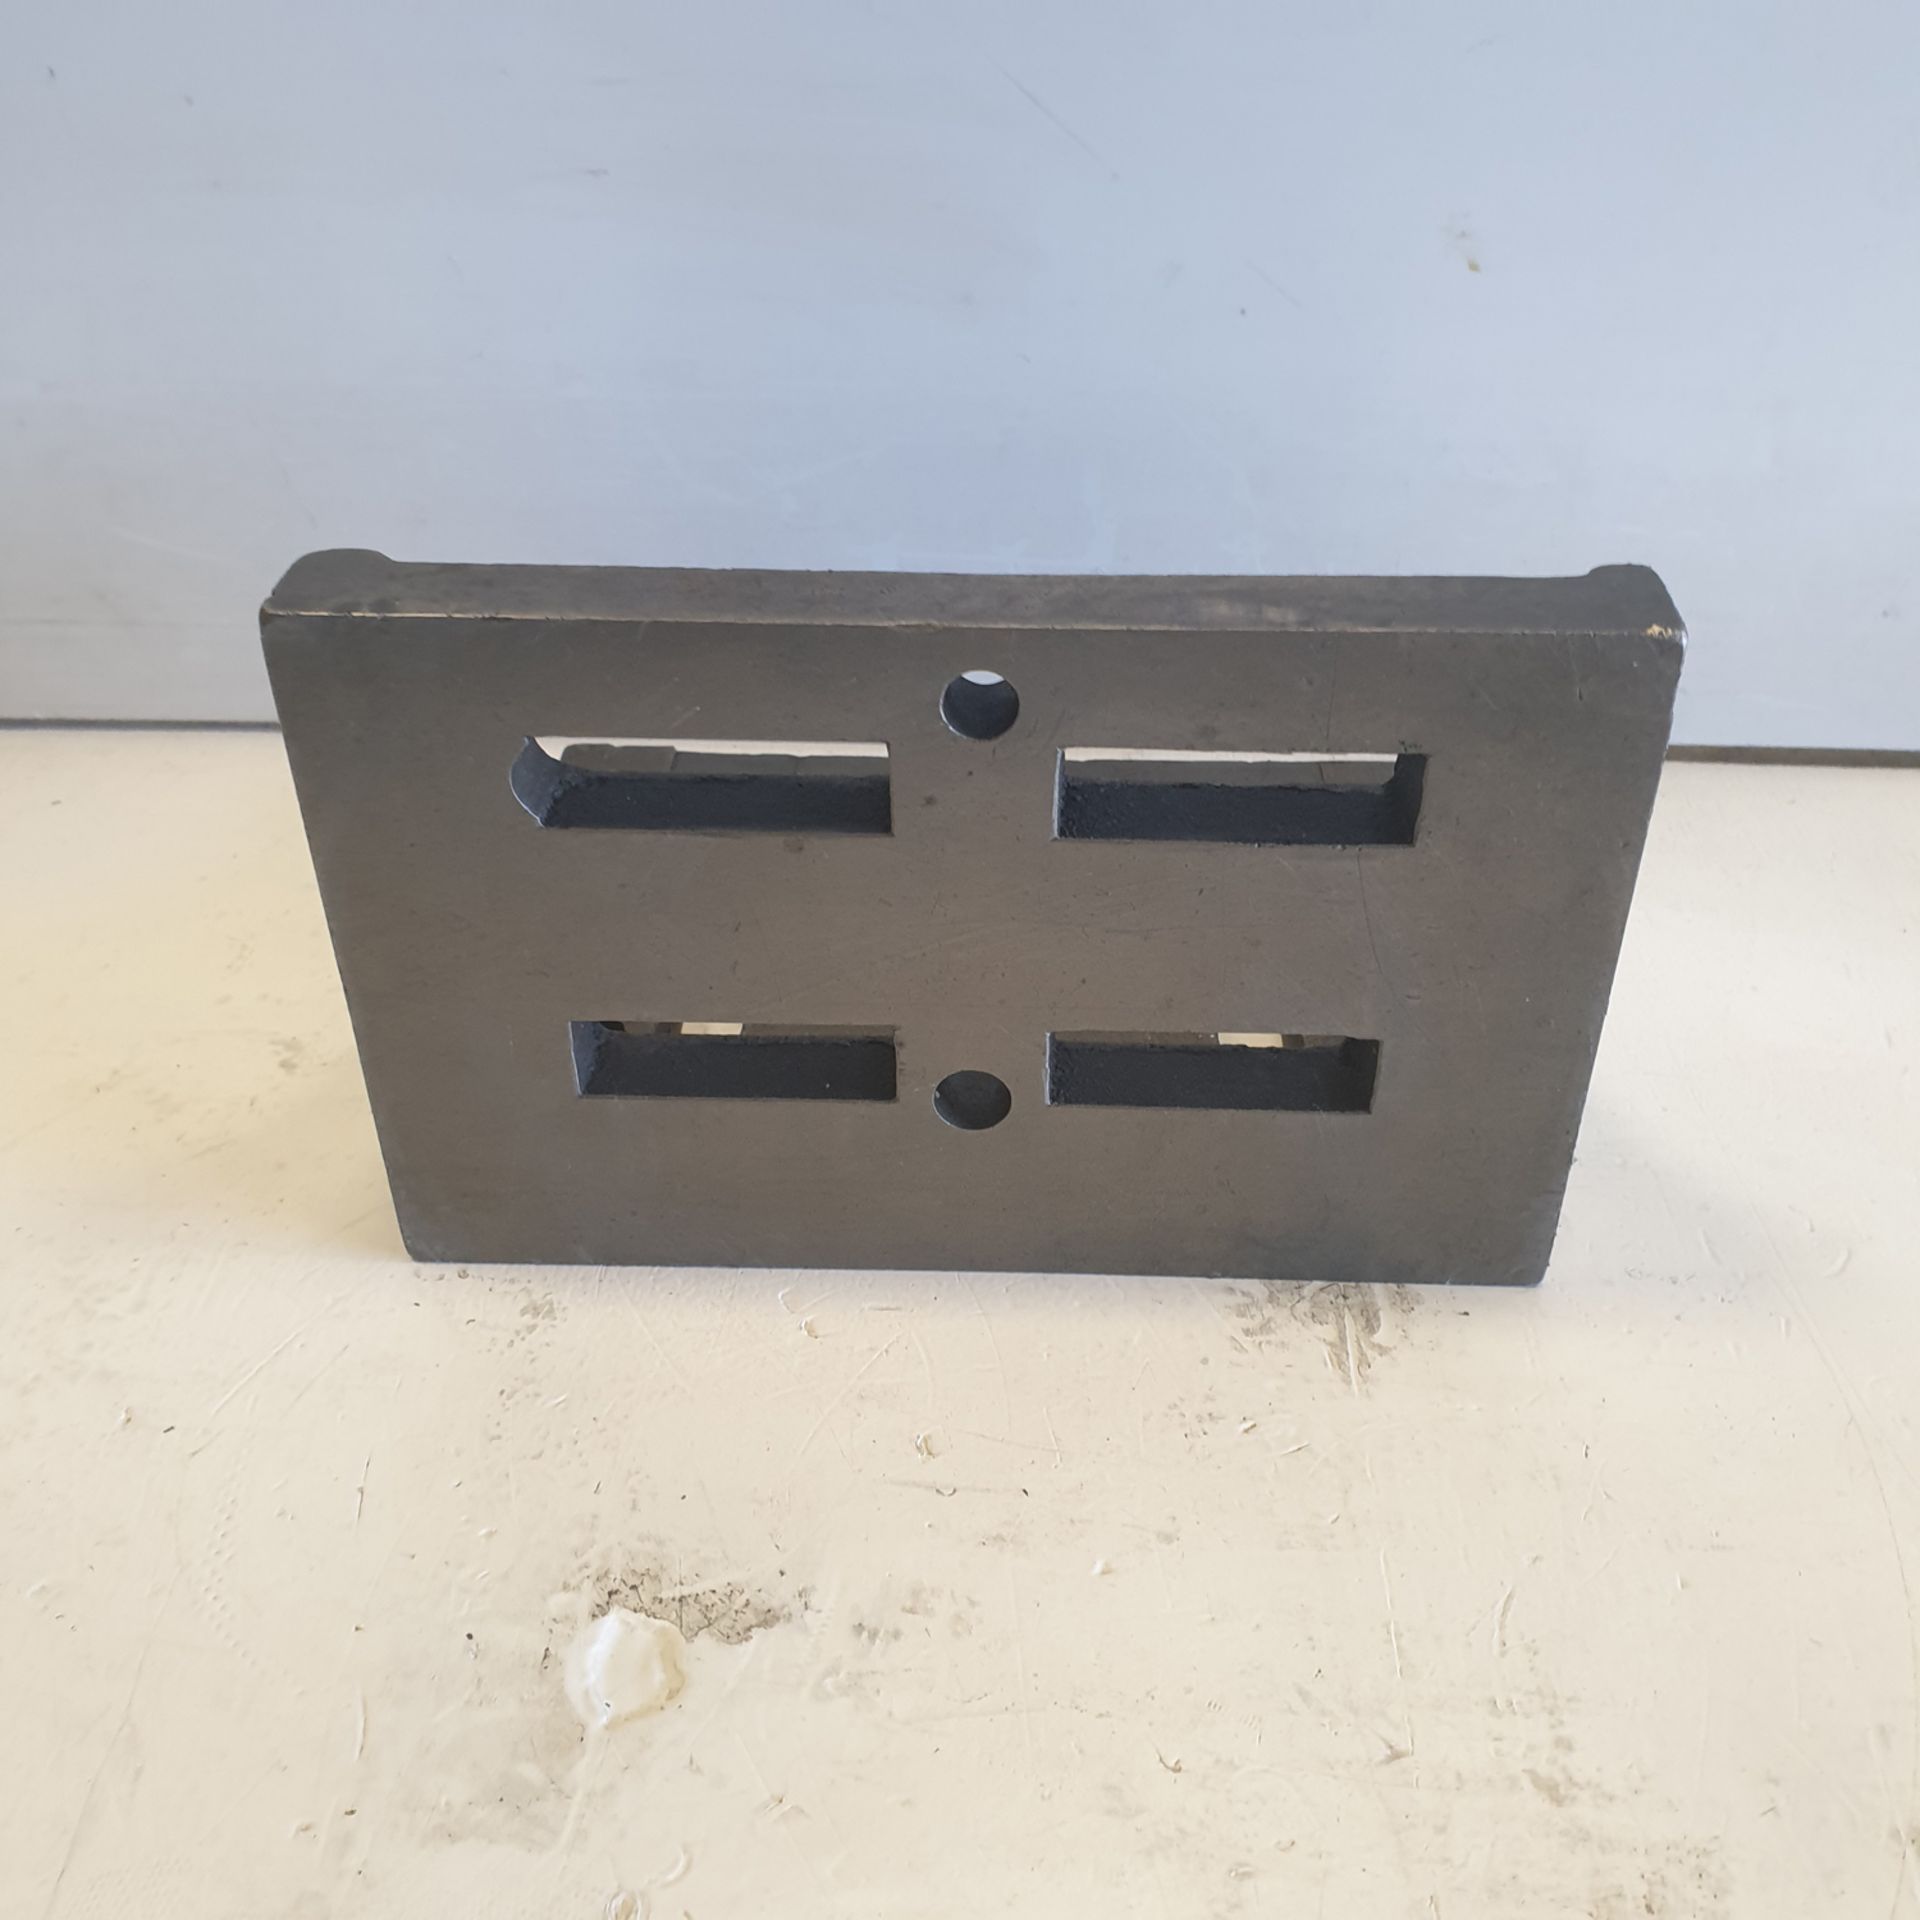 Slotted Angle Plate. Approx Dimensions 8" x 6", 8" x 5". - Image 6 of 6